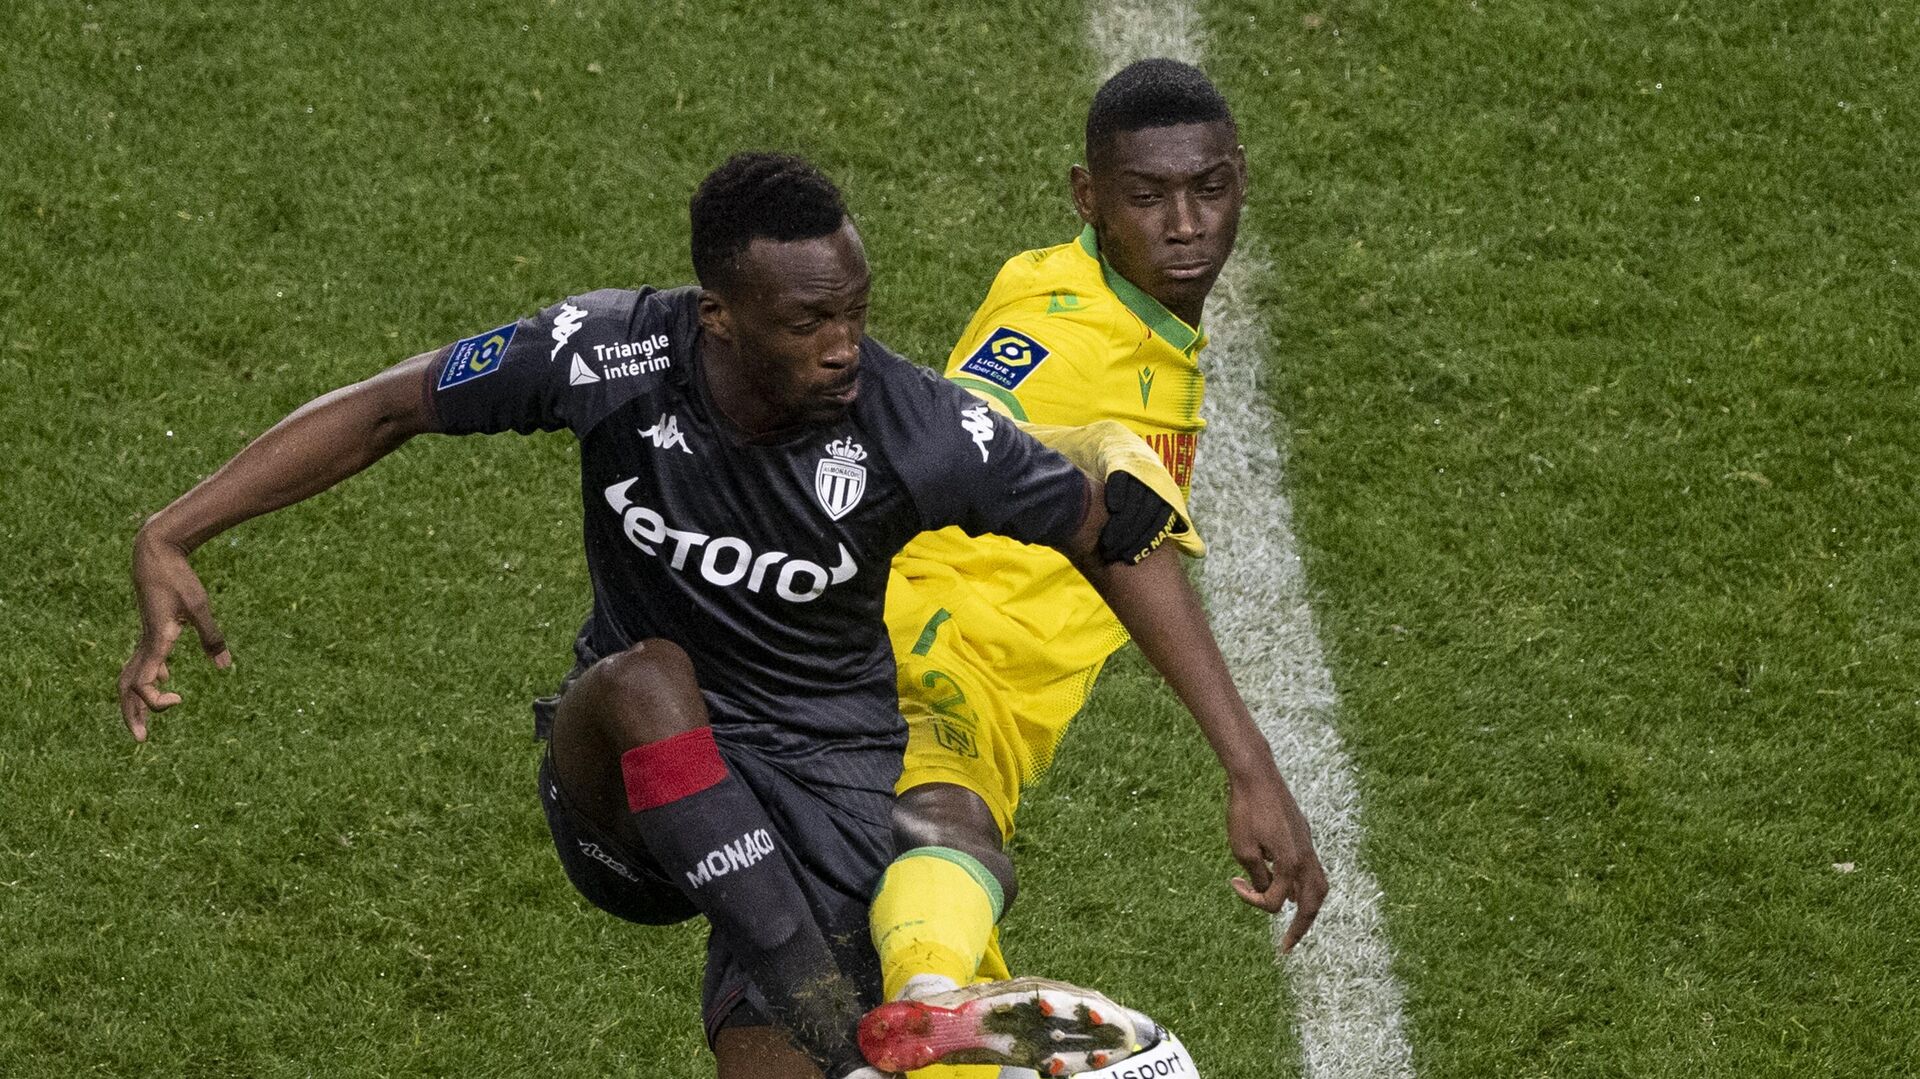 Monaco's French defender Chrislain Matsima (L) fights for the ball with Nantes' Congolese forward Randal Kolo Muani during the French L1 football match between FC Nantes and AS Monaco at the La Beaujoire Stadium in Nantes, western France, on January 9, 2022. (Photo by LOIC VENANCE / AFP) - РИА Новости, 1920, 09.01.2022